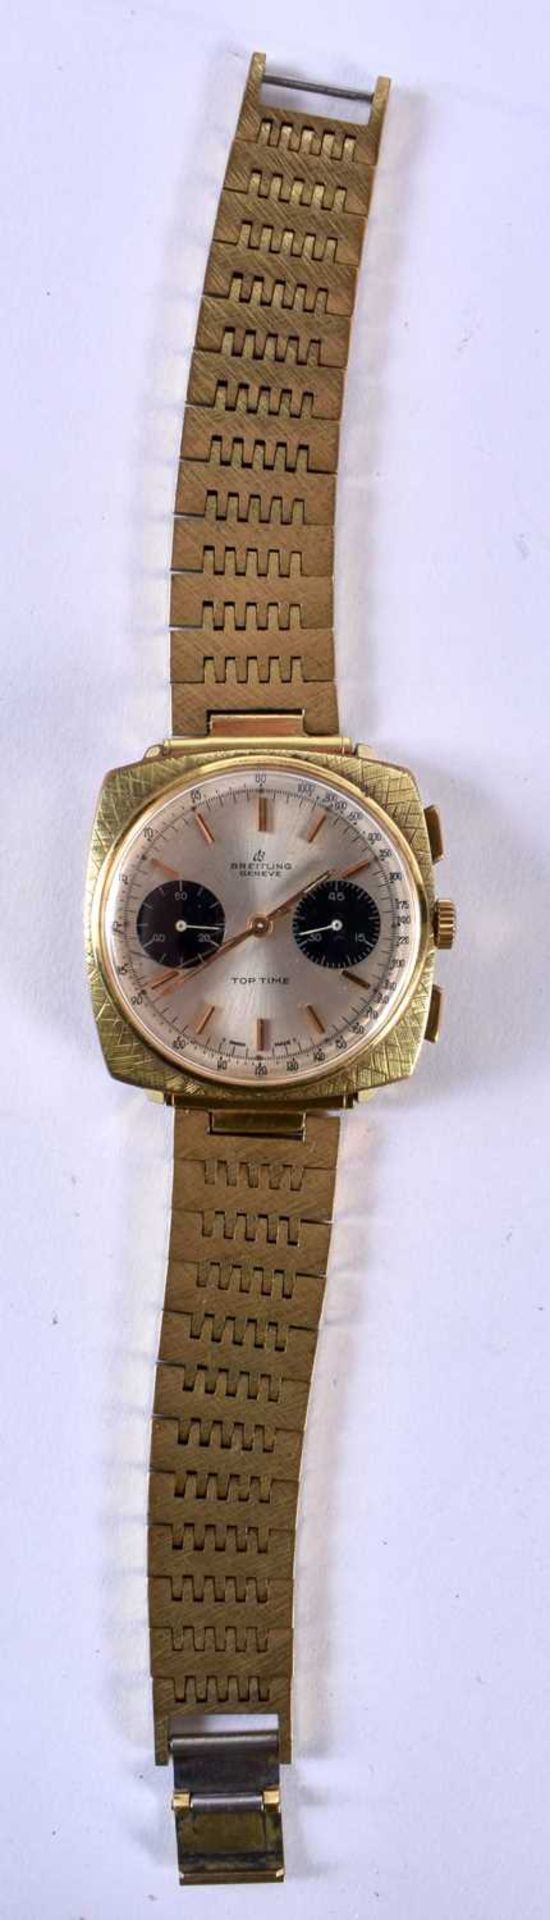 Vintage Breitling Top Time Chronograph Men's Watch Ref 2009.  Dial 3.5cm incl crown, working - Image 2 of 5